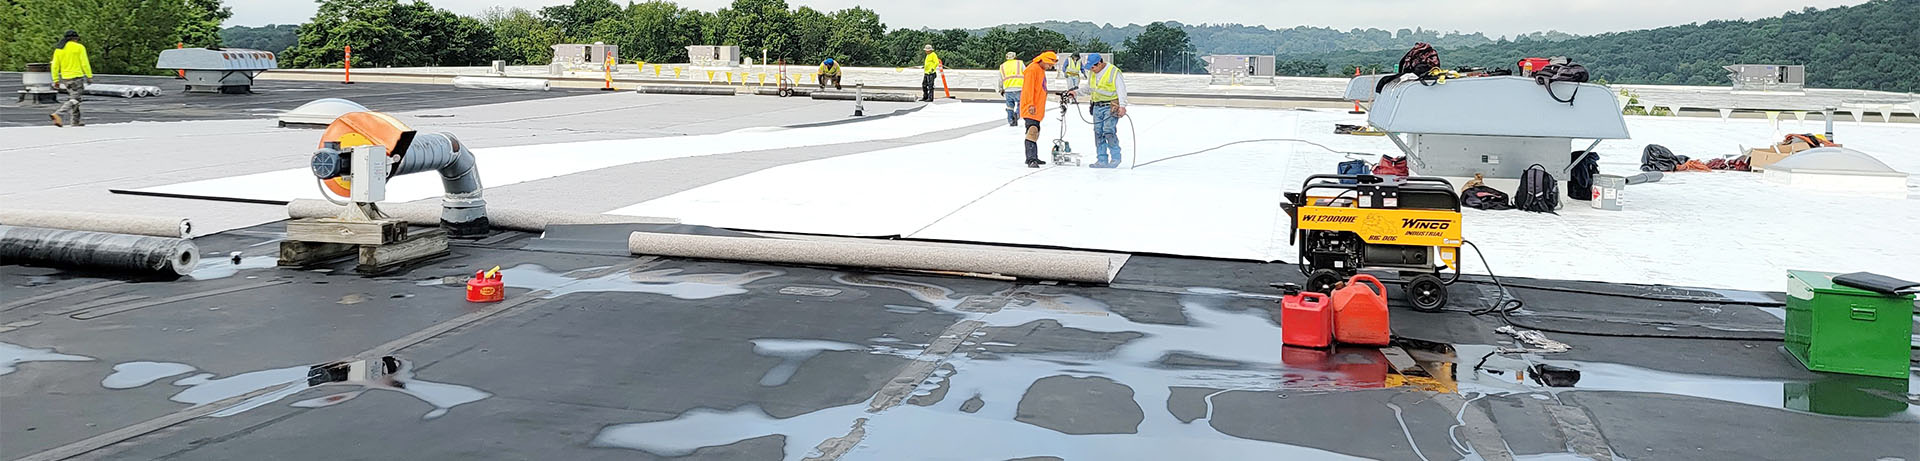 A Vanguard Roofing crew installing a new flat commercial roof in Worchester, MA.